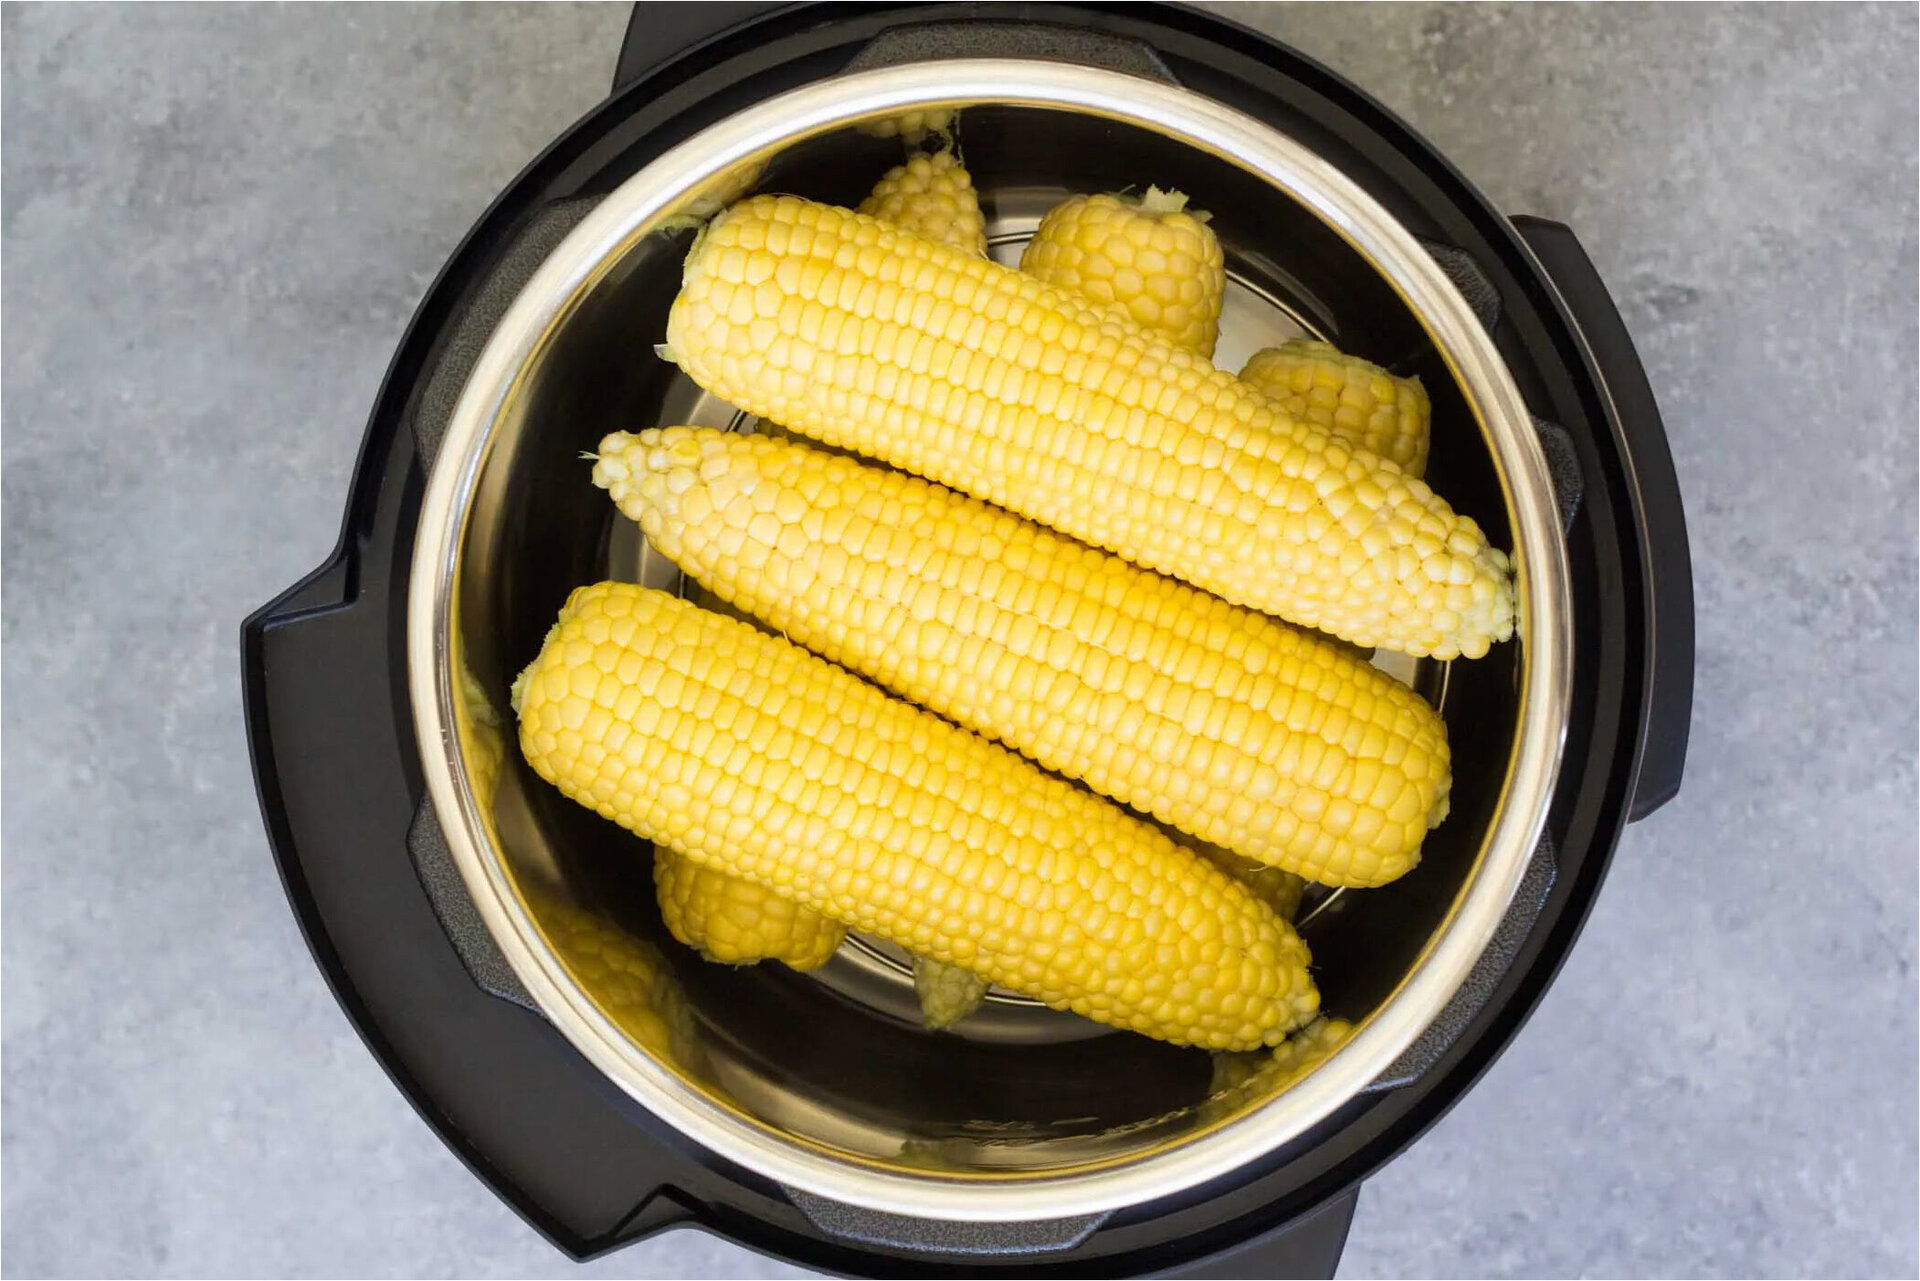 How To Make Corn On The Cob In An Electric Pressure Cooker